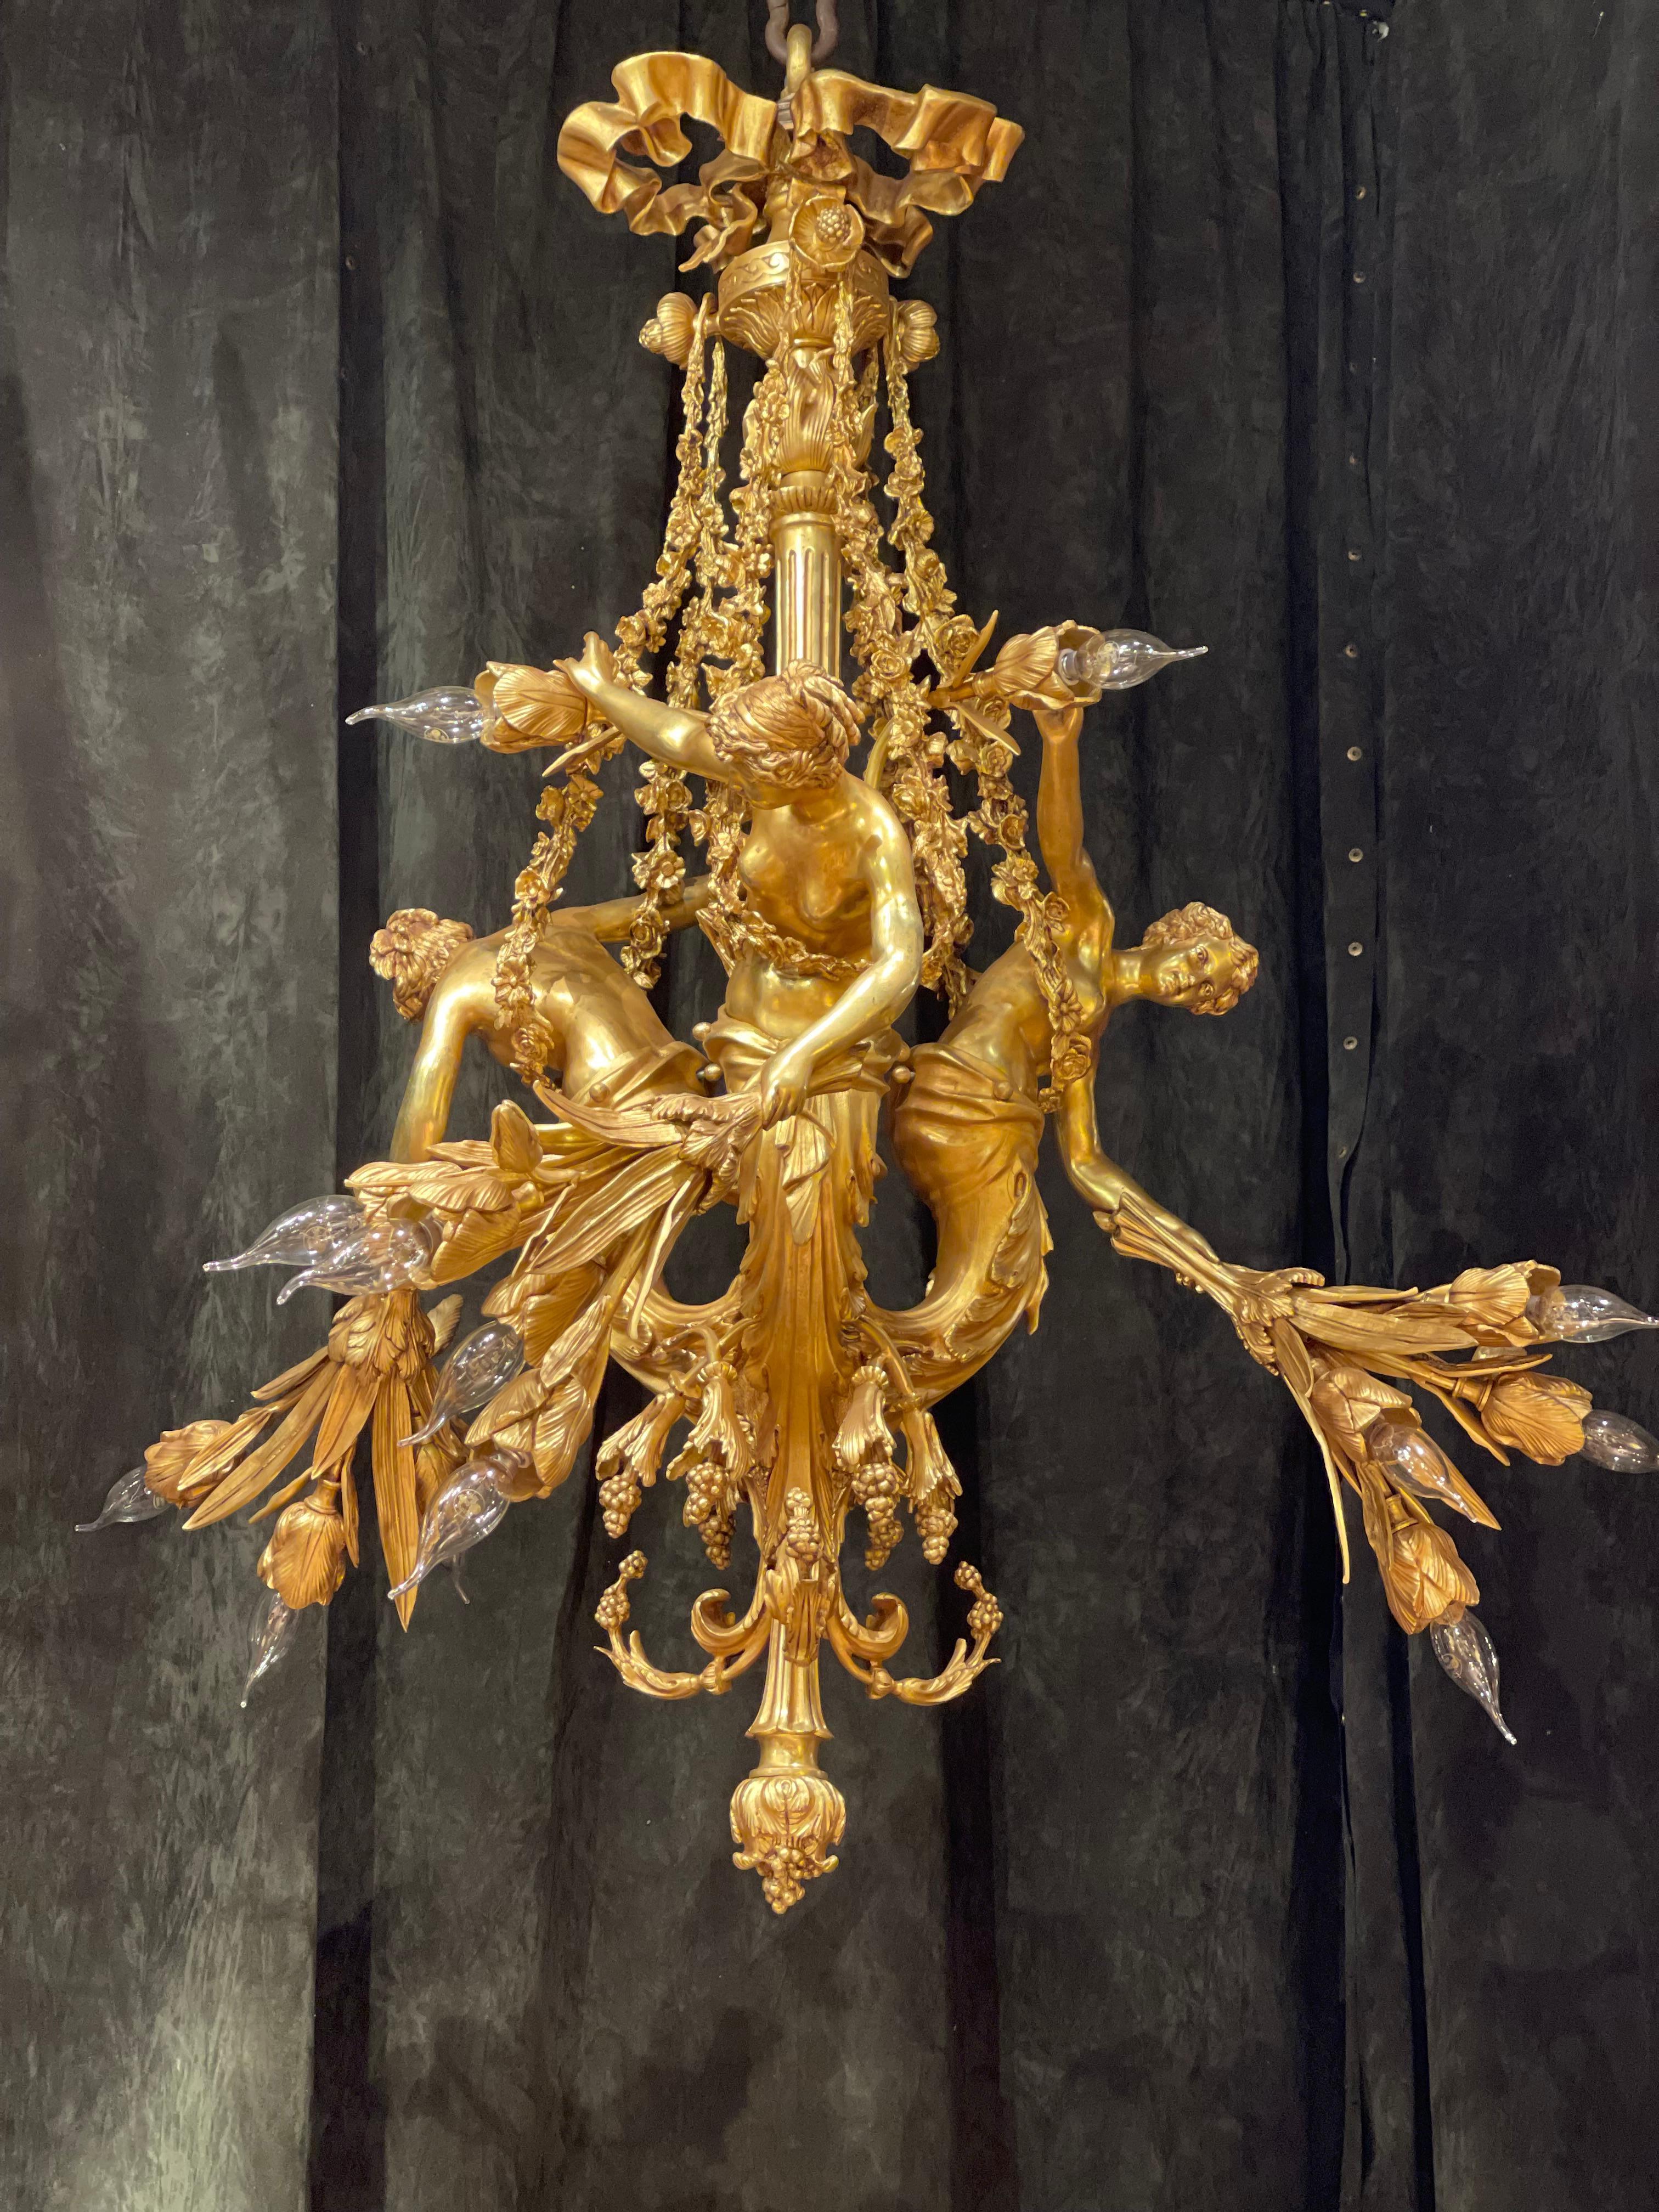 Monumental chandelier in Louis XVI style, solid bronze, gilt, unique
Finely chased and gilded bronze. Extremely rare and decorative chandelier made of solid bronze fire-gilded. Body flanked by three ladies holding a bunch of flowers in the form of